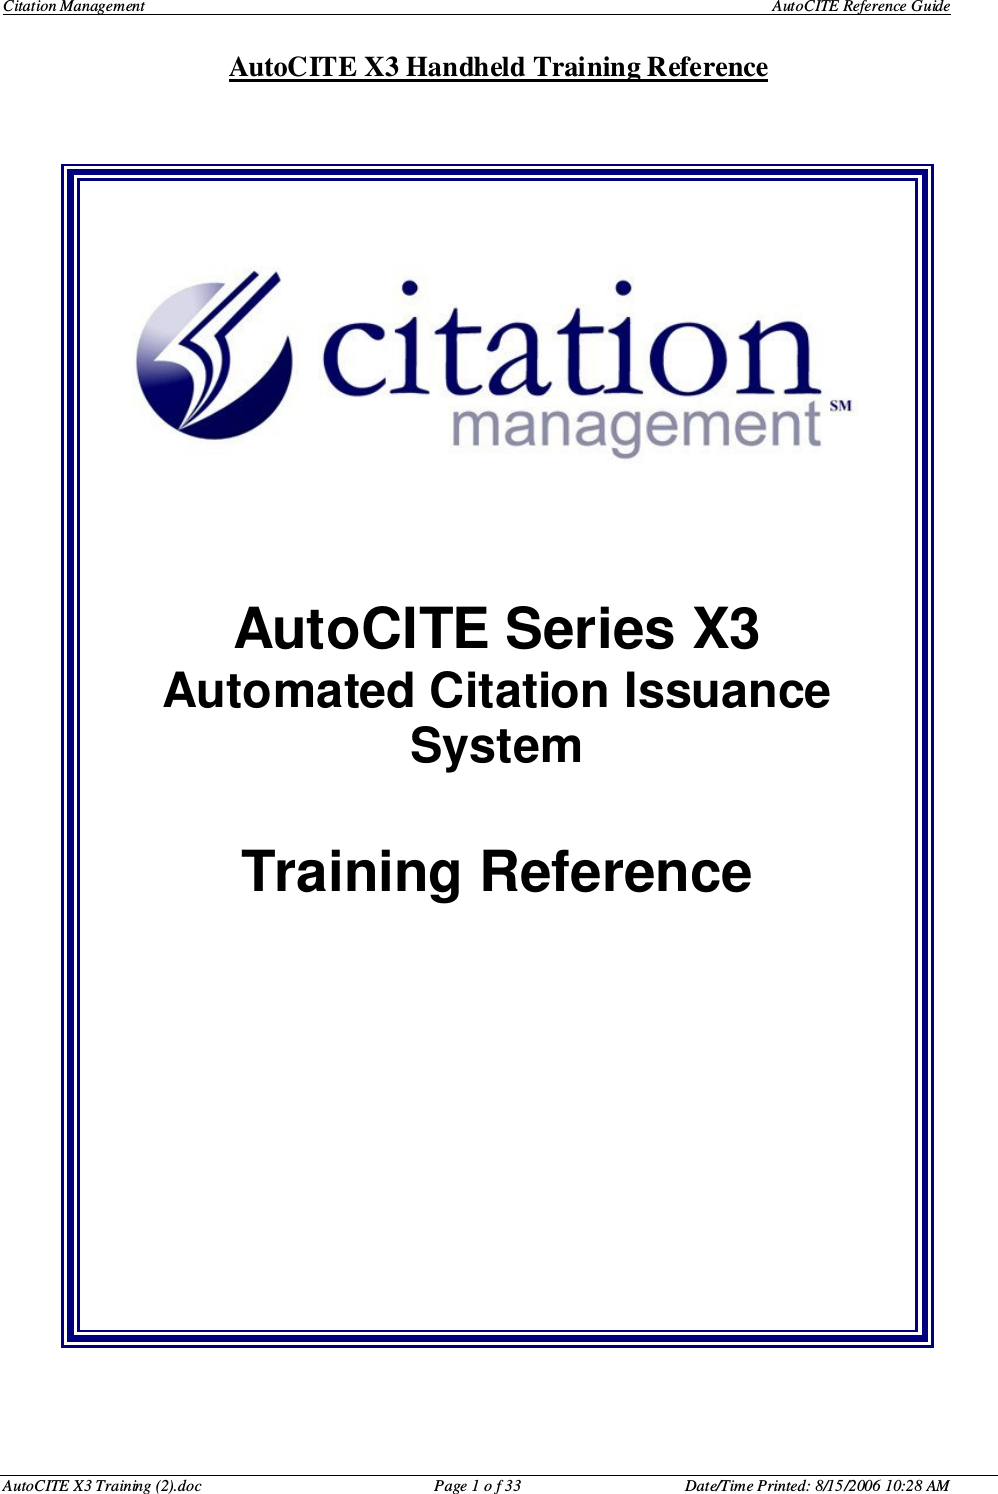 Citation Management    AutoCITE Reference Guide  AutoCITE X3 Handheld Training Reference AutoCITE X3 Training (2).doc  Page 1 o f 33  Date/Time Printed: 8/15/2006 10:28 AM       AutoCITE Series X3 Automated Citation Issuance System  Training Reference     